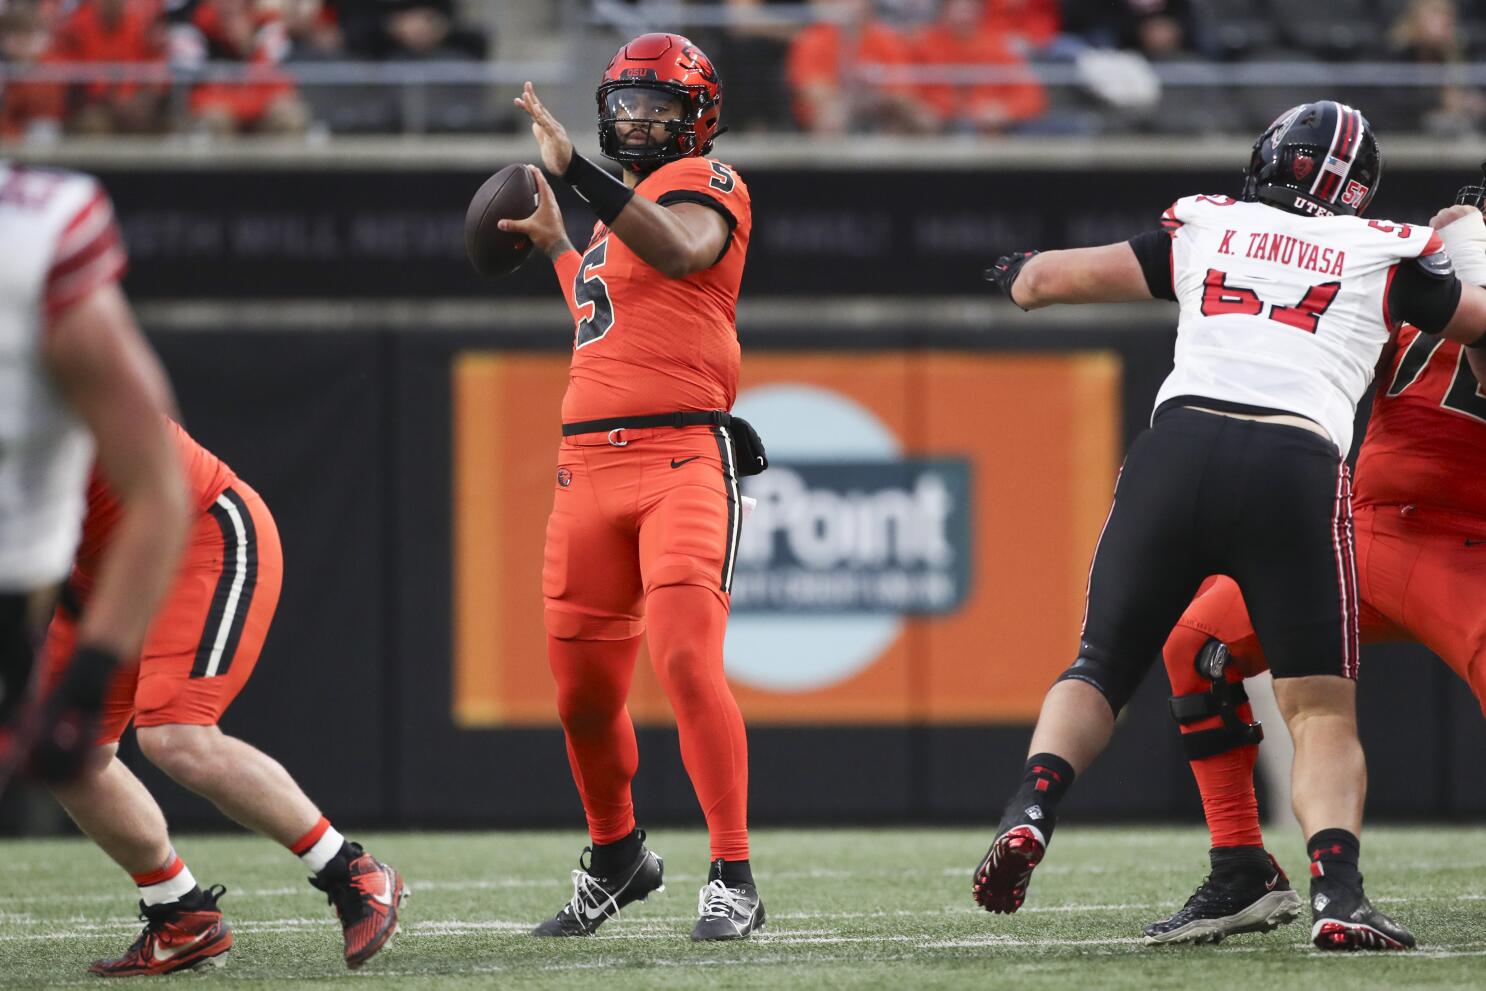 No. 15 Oregon State brings superior passing game into matchup